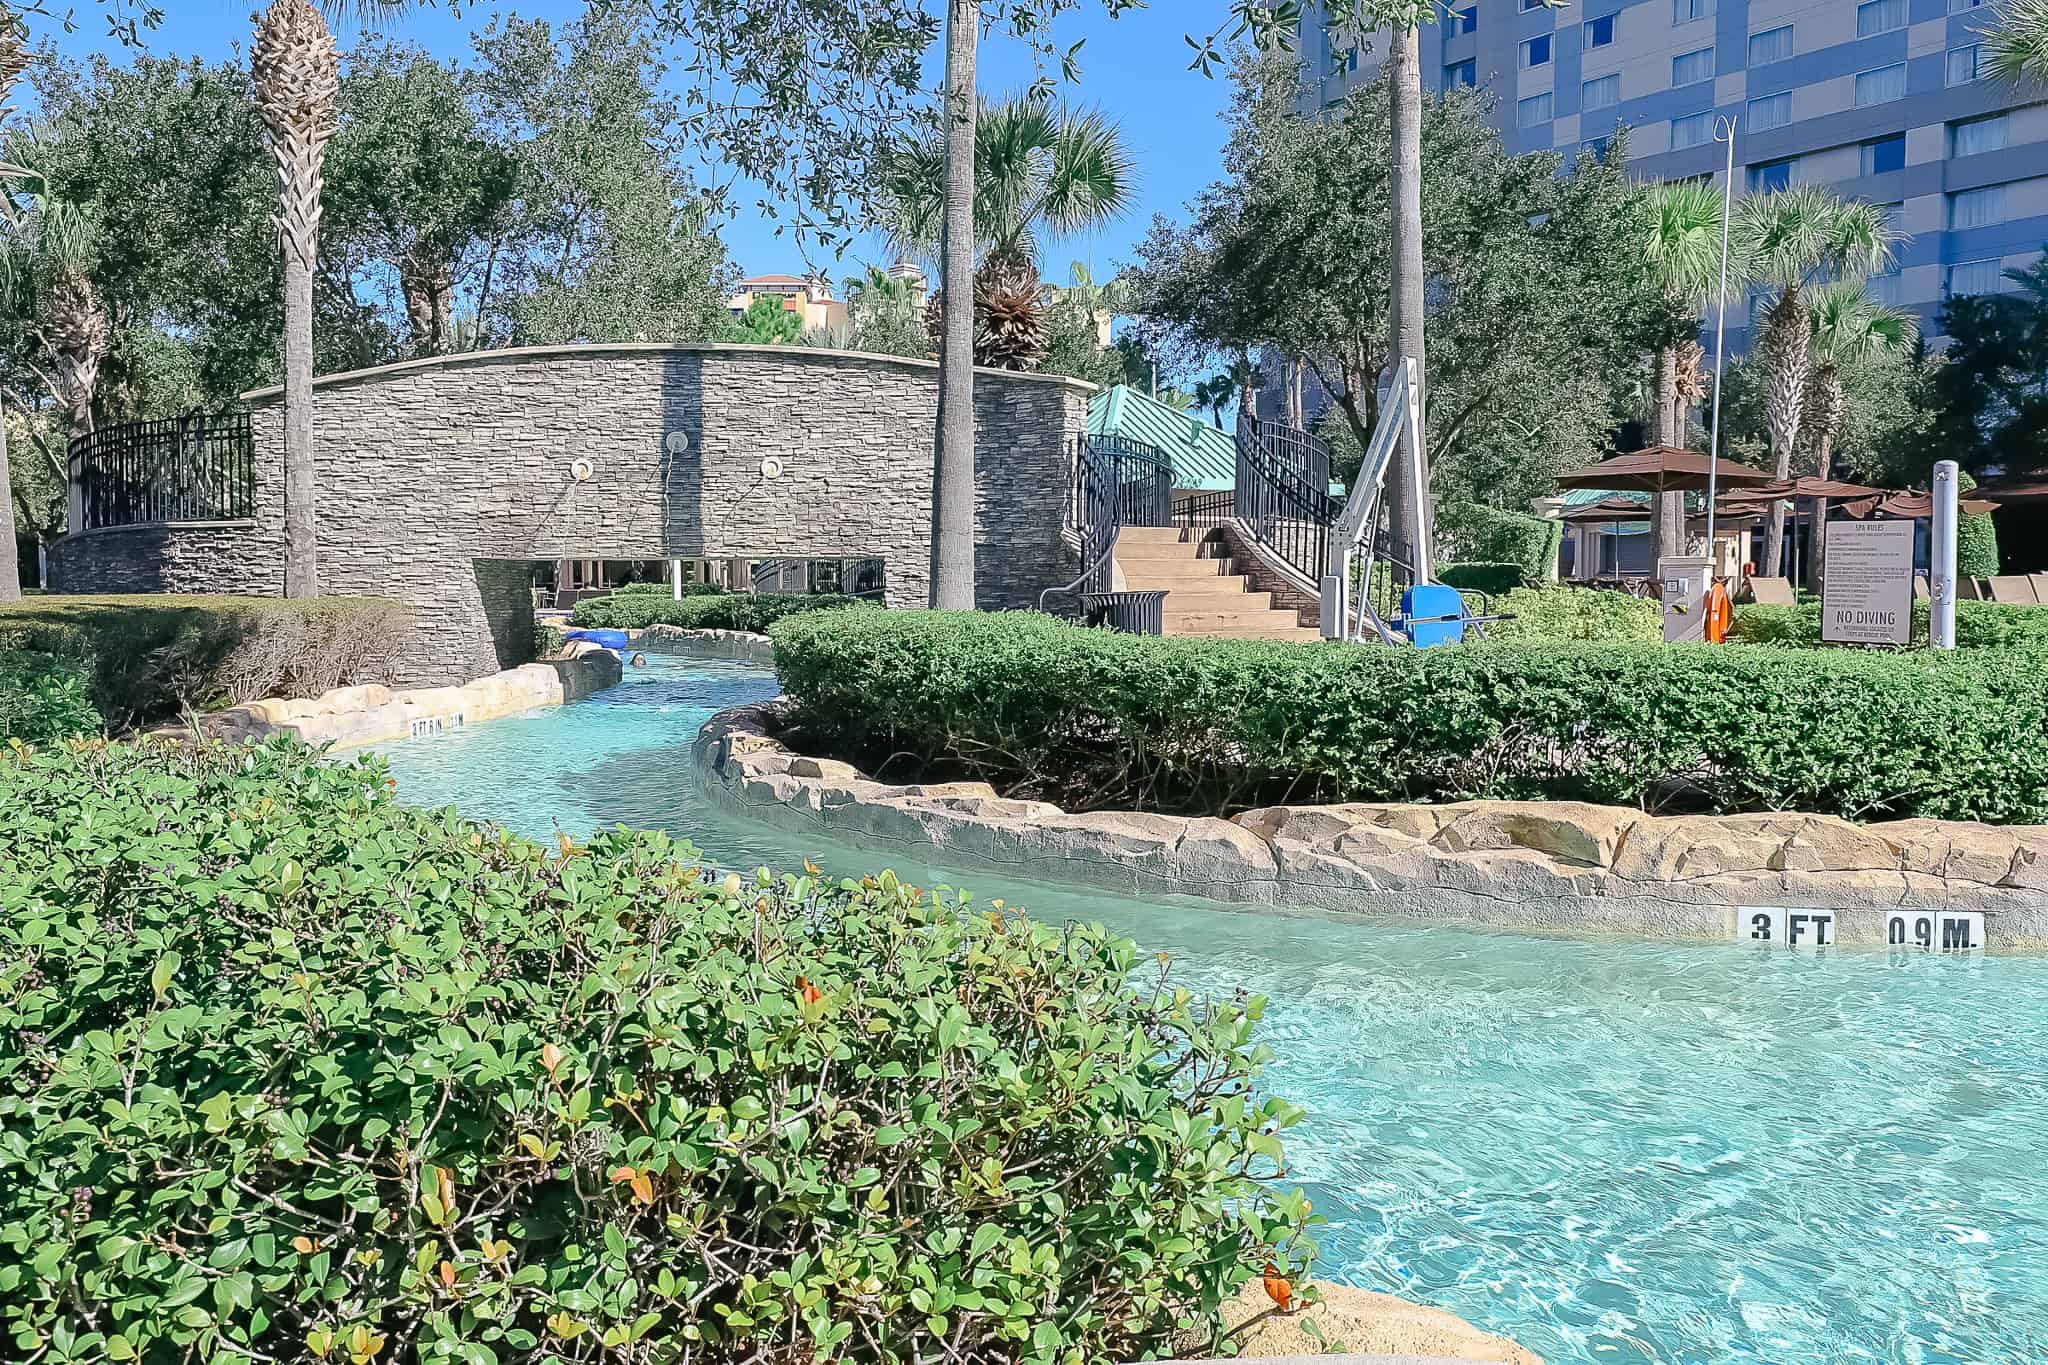 the lazy river from the back of the pool area 